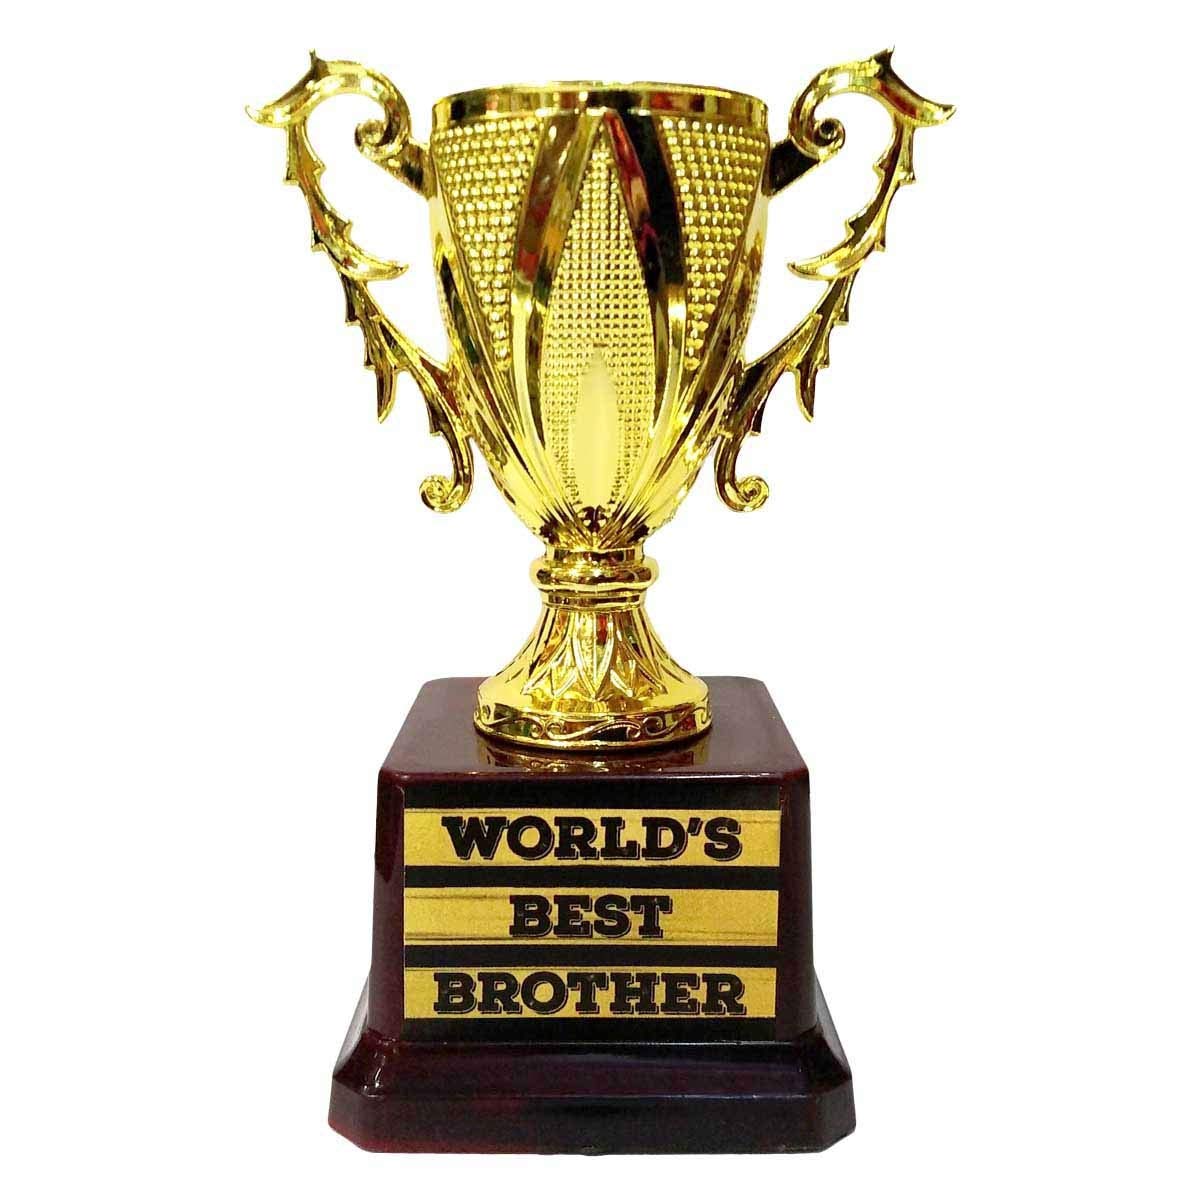 World's Best Brother Trophy | Buy today at www.grabchoice.com